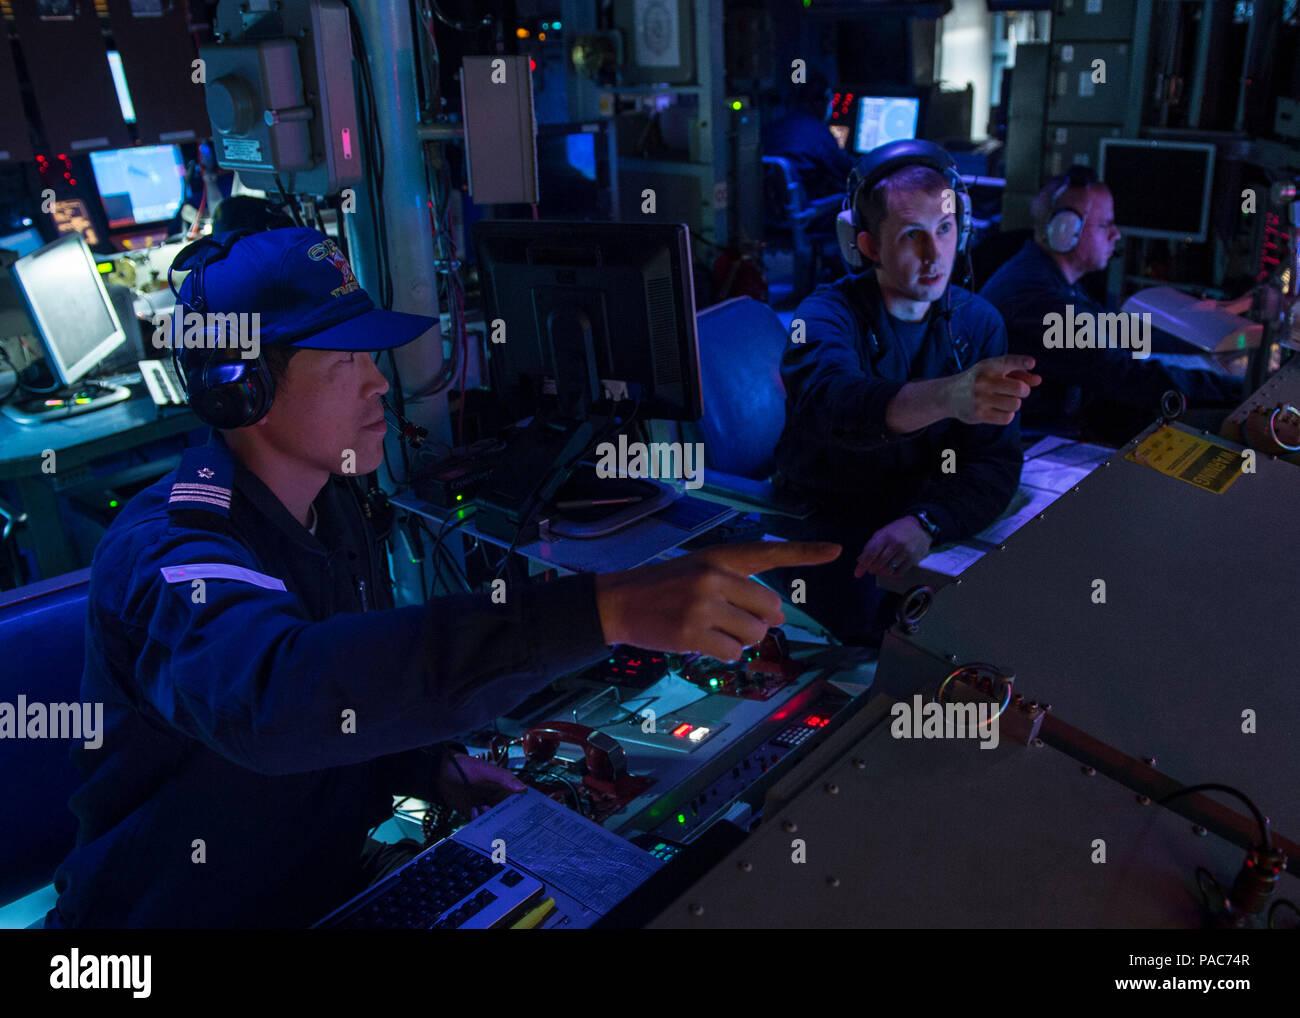 WATERS NEAR GUAM (Mar. 9, 2016) Lt. Thomas Brewer, (right), Chief Engineer of Arliegh Burke-class guided-missile destroyer USS McCampbell (DDG 85), and Japan Maritime Self-Defense Force (JMSDF) Lt. Cmdr. Hironori Ikeda, of JMSDF Chief staff, Escort Division 6, discuss tactical data from the Combat Information Center (CIC) during Multi Sail 2016. Multi Sail is a bilateral training exercise aimed at interoperability between the U.S. and Japanese forces. This exercise builds interoperability and benefits from realistic, shared training, enhancing our ability to work together to confront any conti Stock Photo